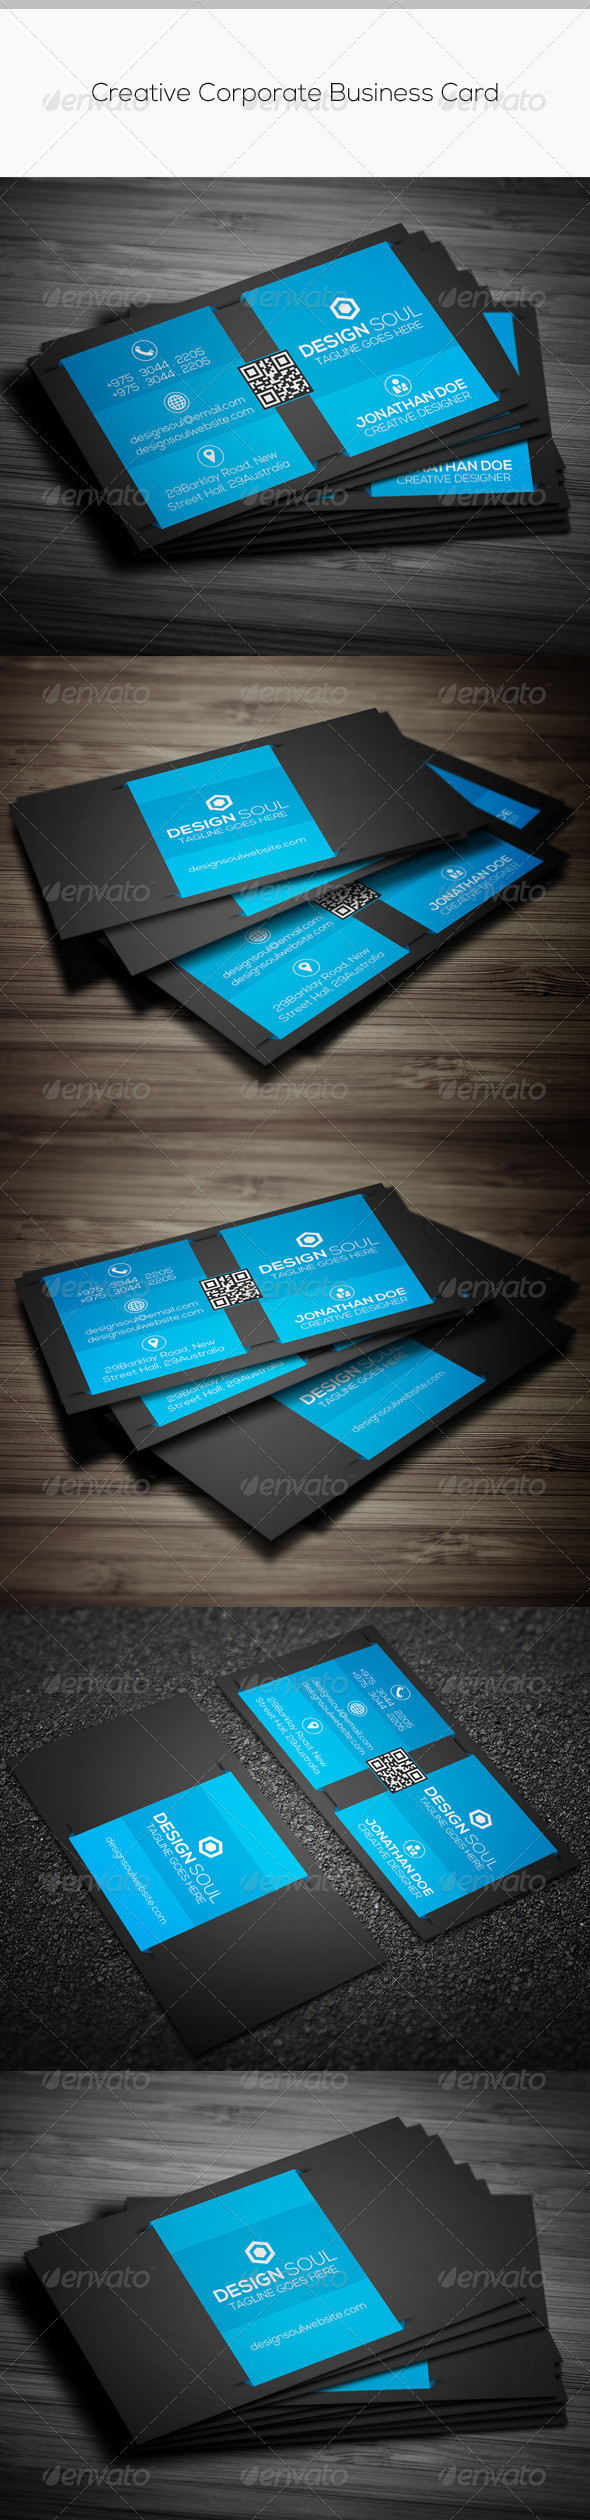 Creative corporate business card preview